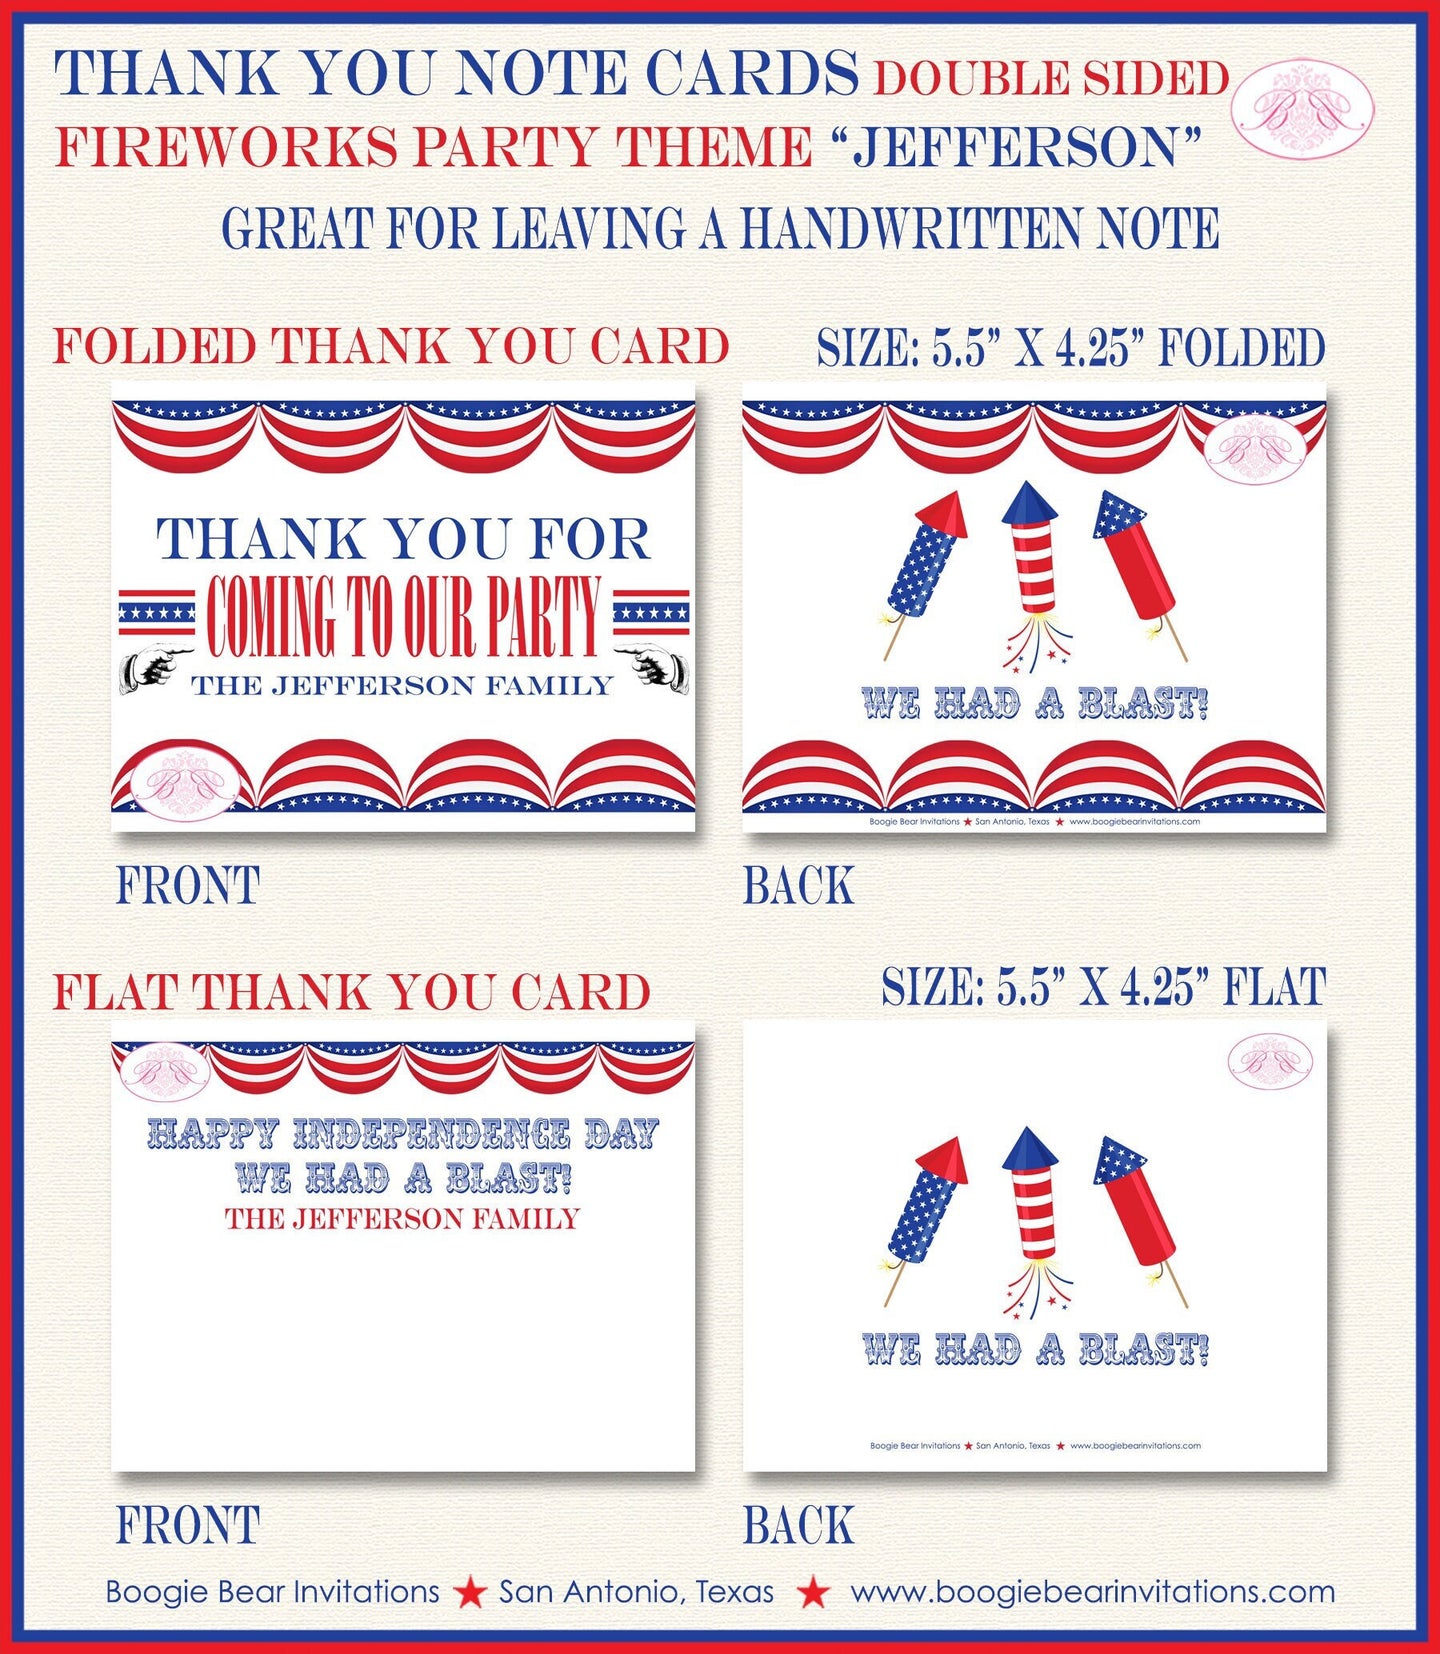 4th of July Party Thank You Card Birthday Favor Note Fireworks Red White Blue United States Boogie Bear Invitations Jefferson Theme Printed